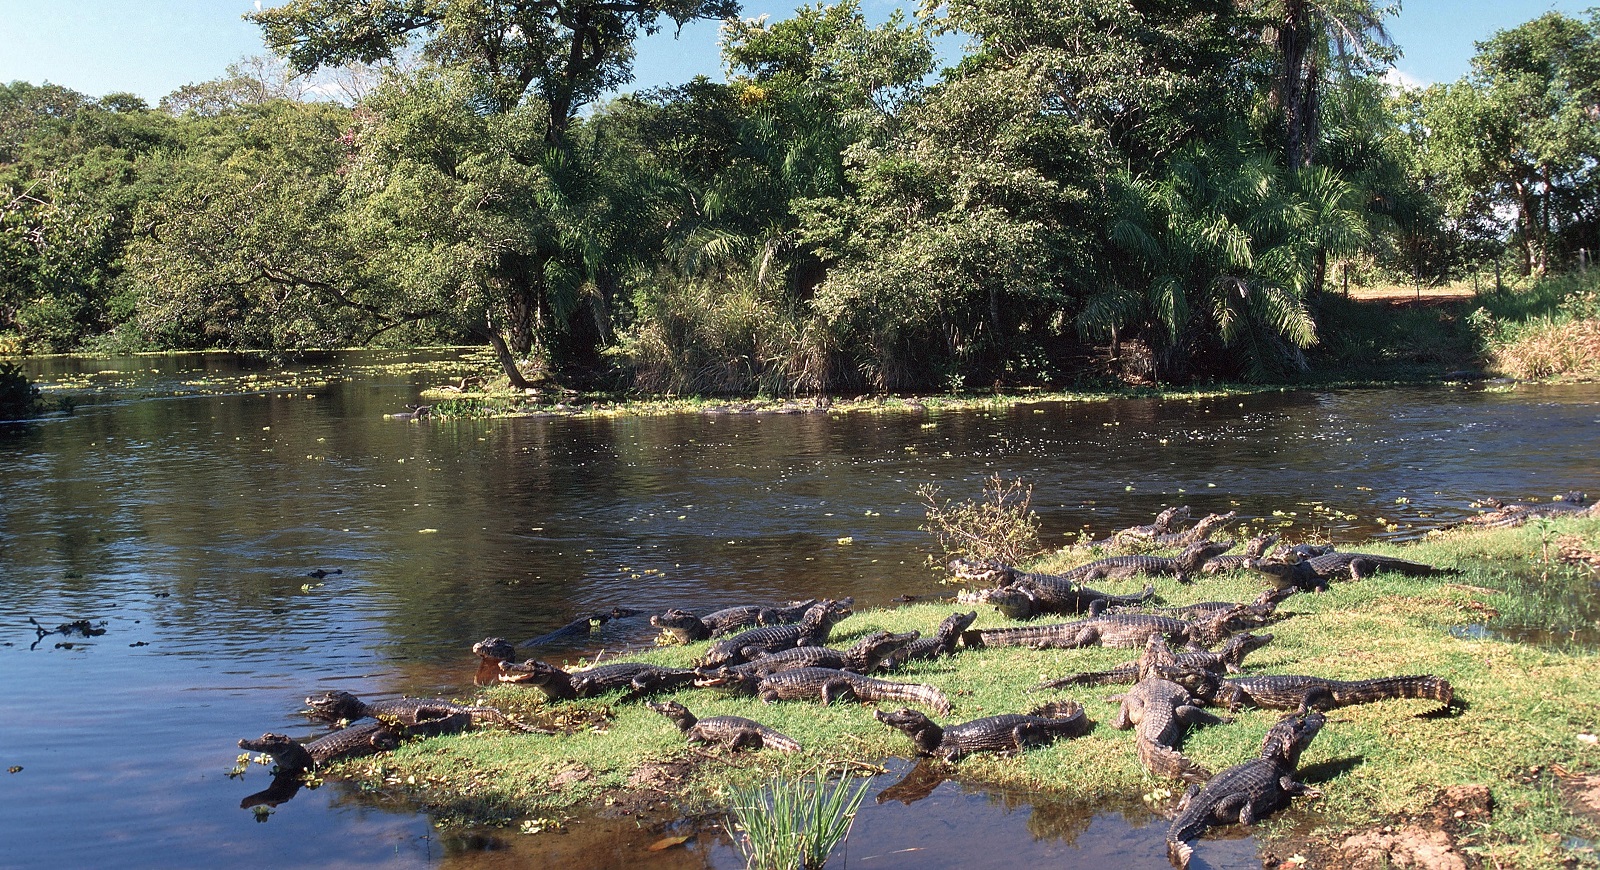 The Pantanal is home to a great diversity of species, including the Paraguay caiman.